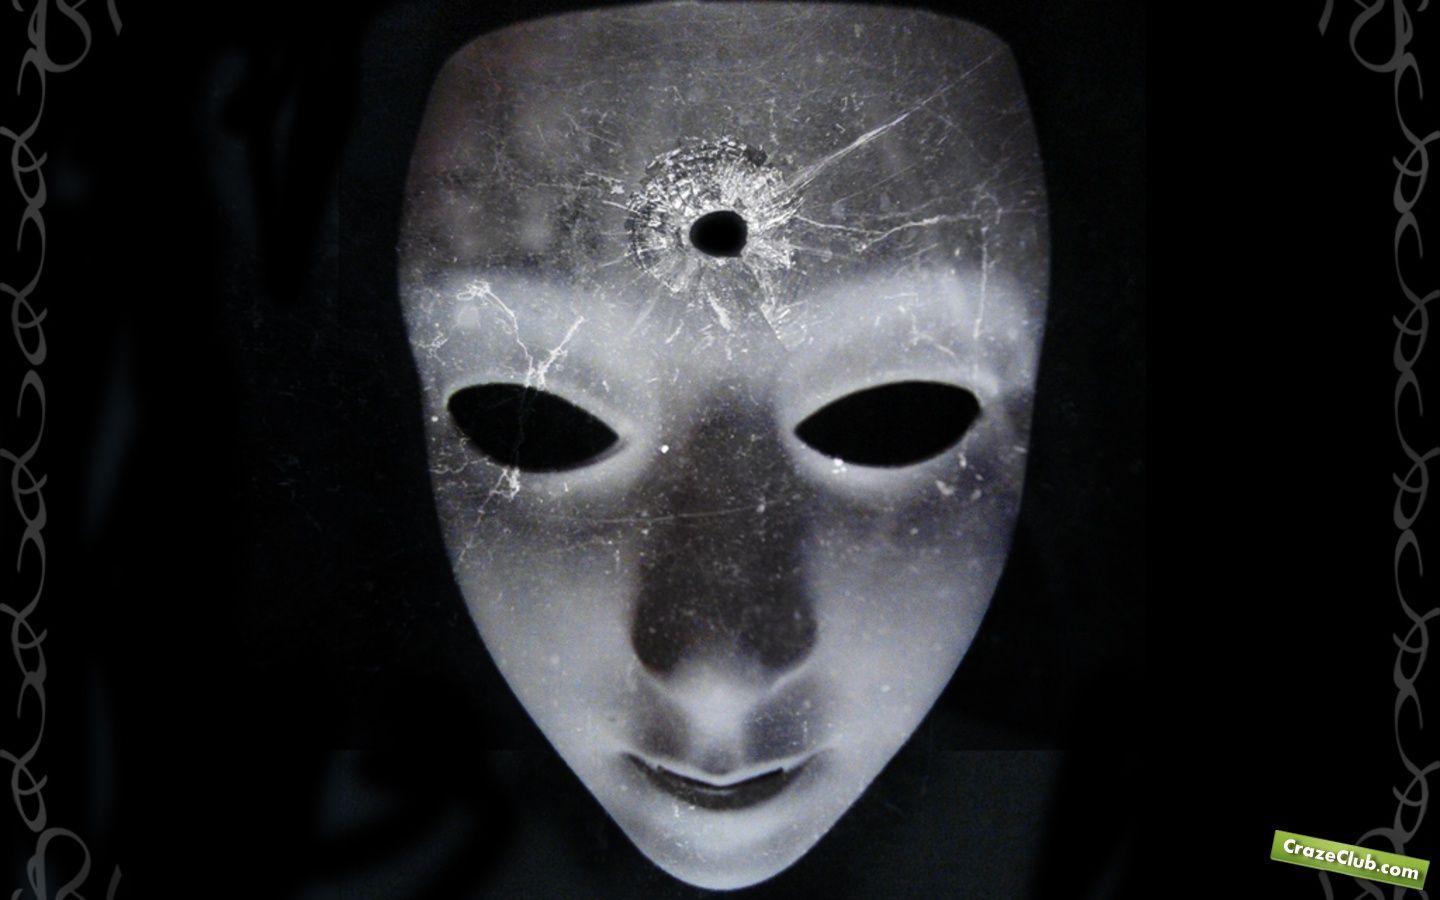 Enjoy: Masks Wallpaper, Amazing Scary in high resolution